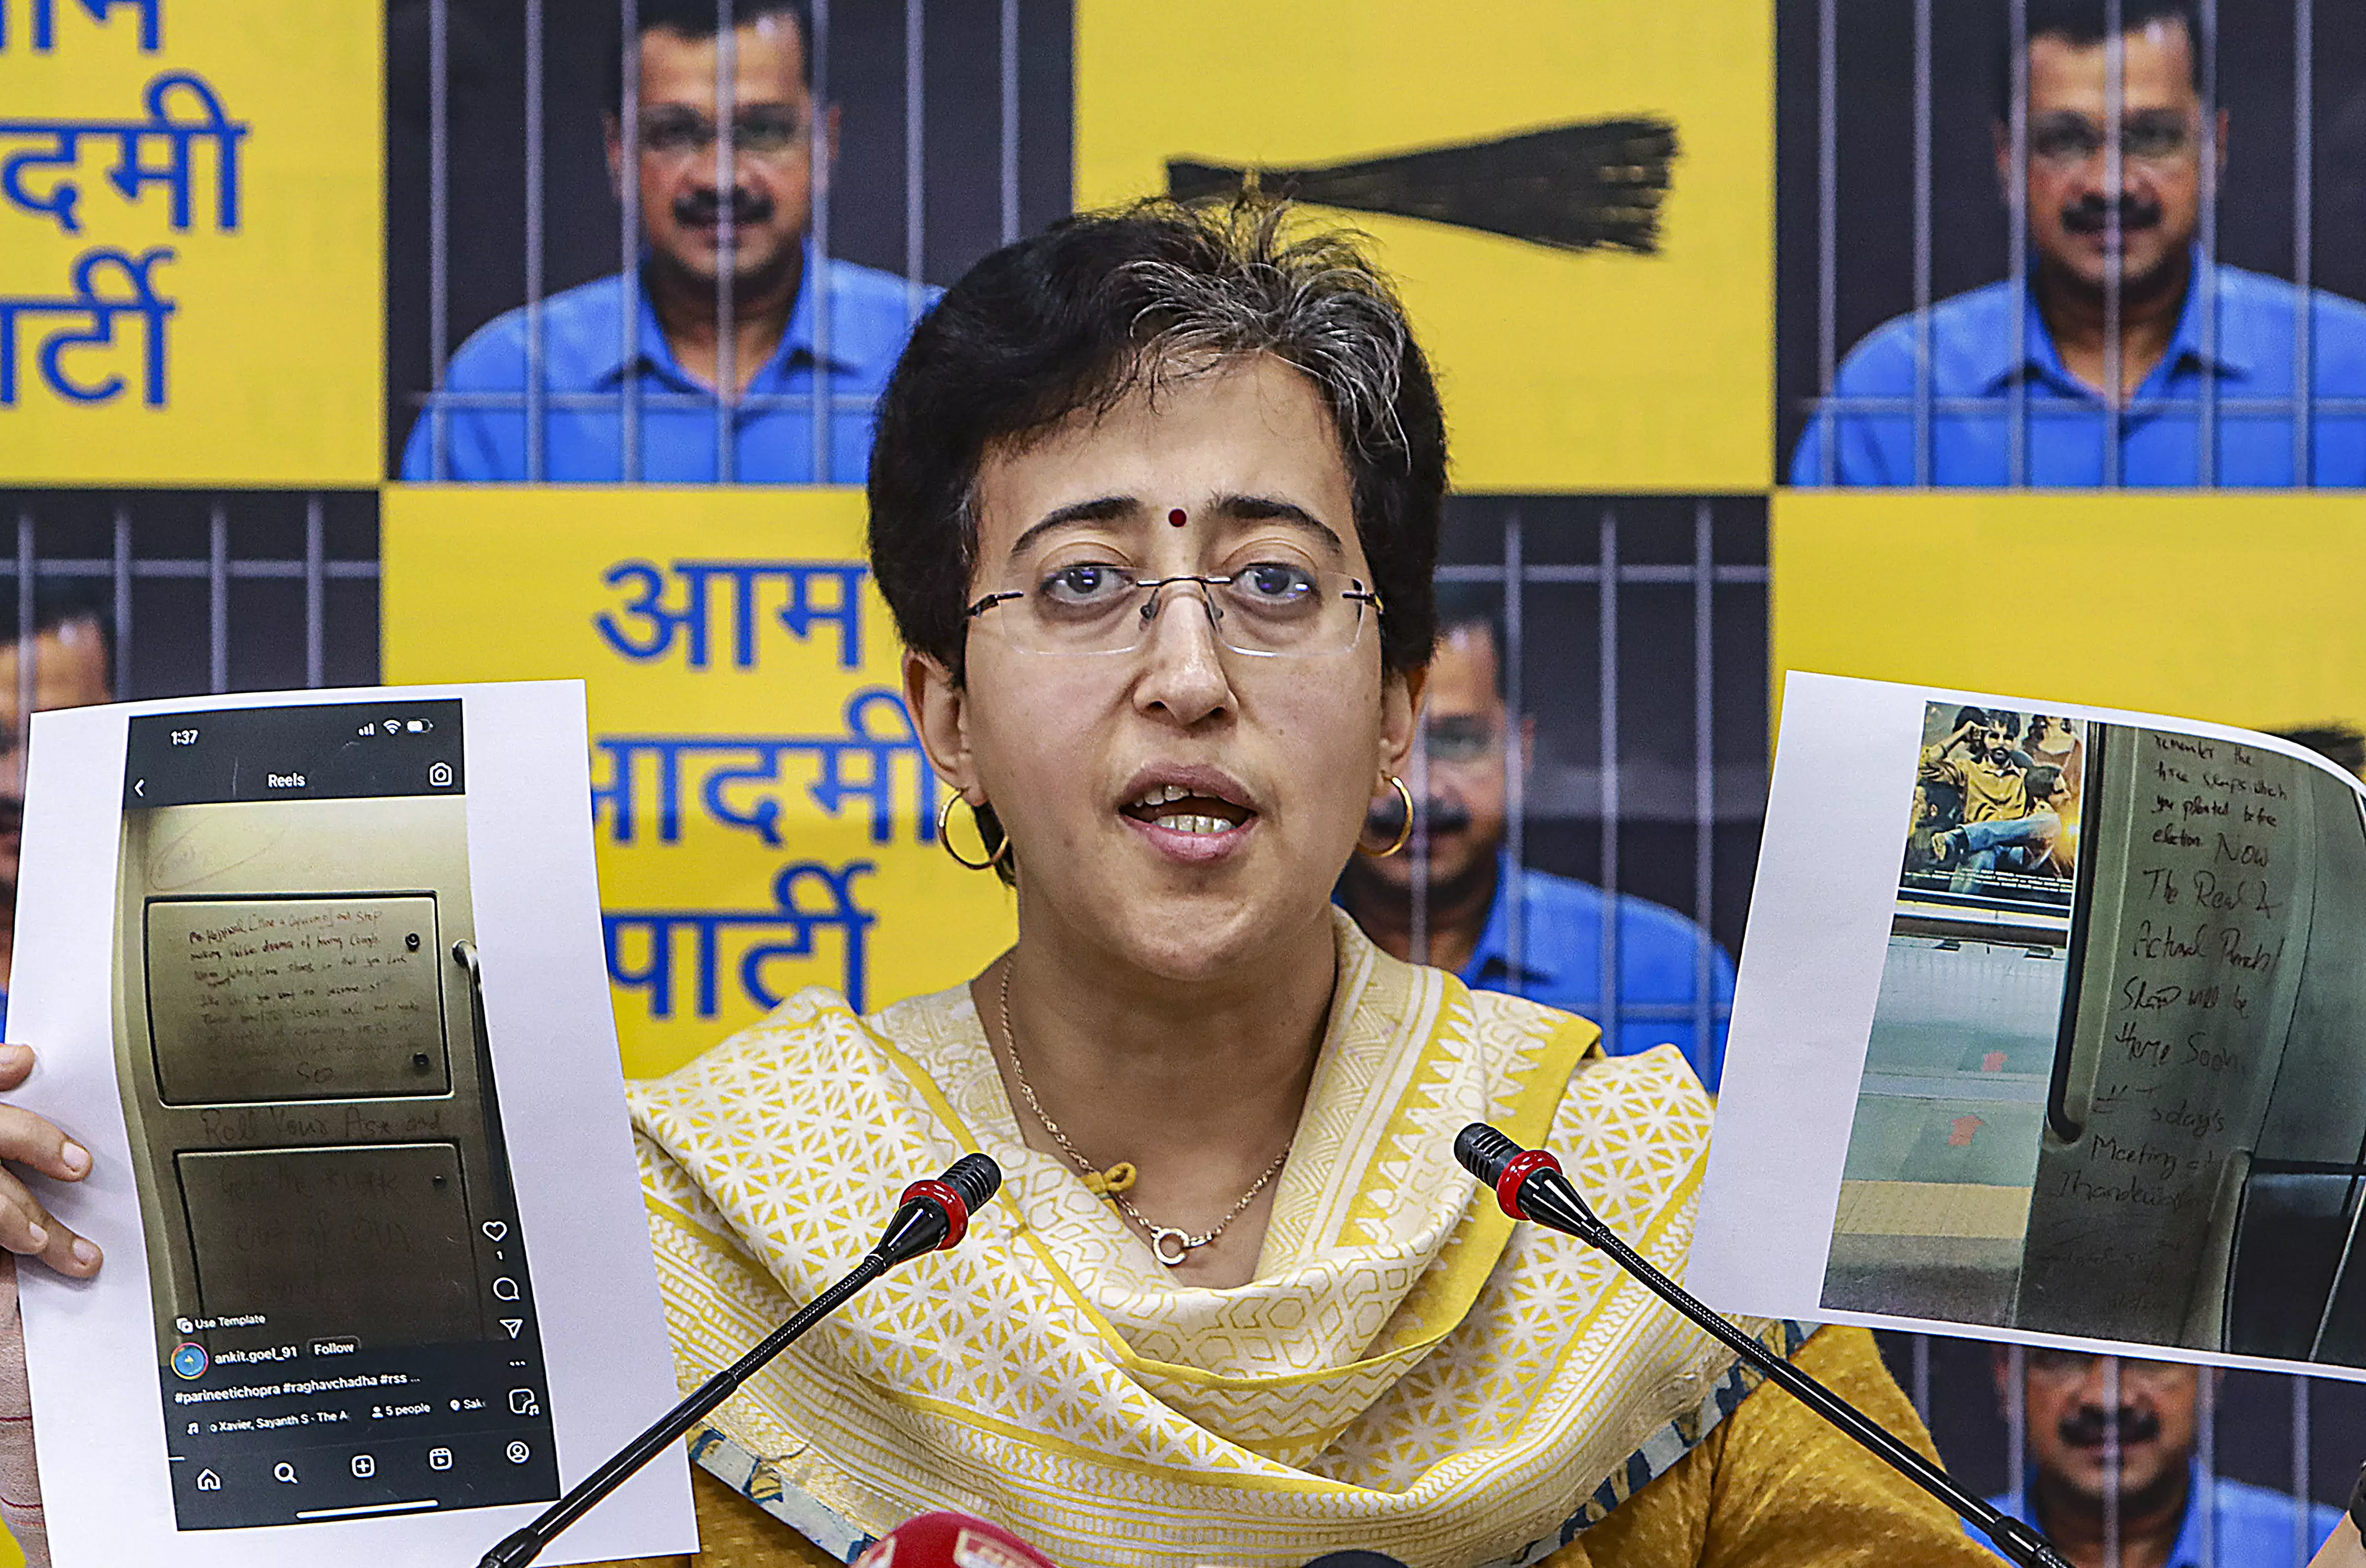 UP power stations failure led to outage in Delhi, says AAP minister Atishi